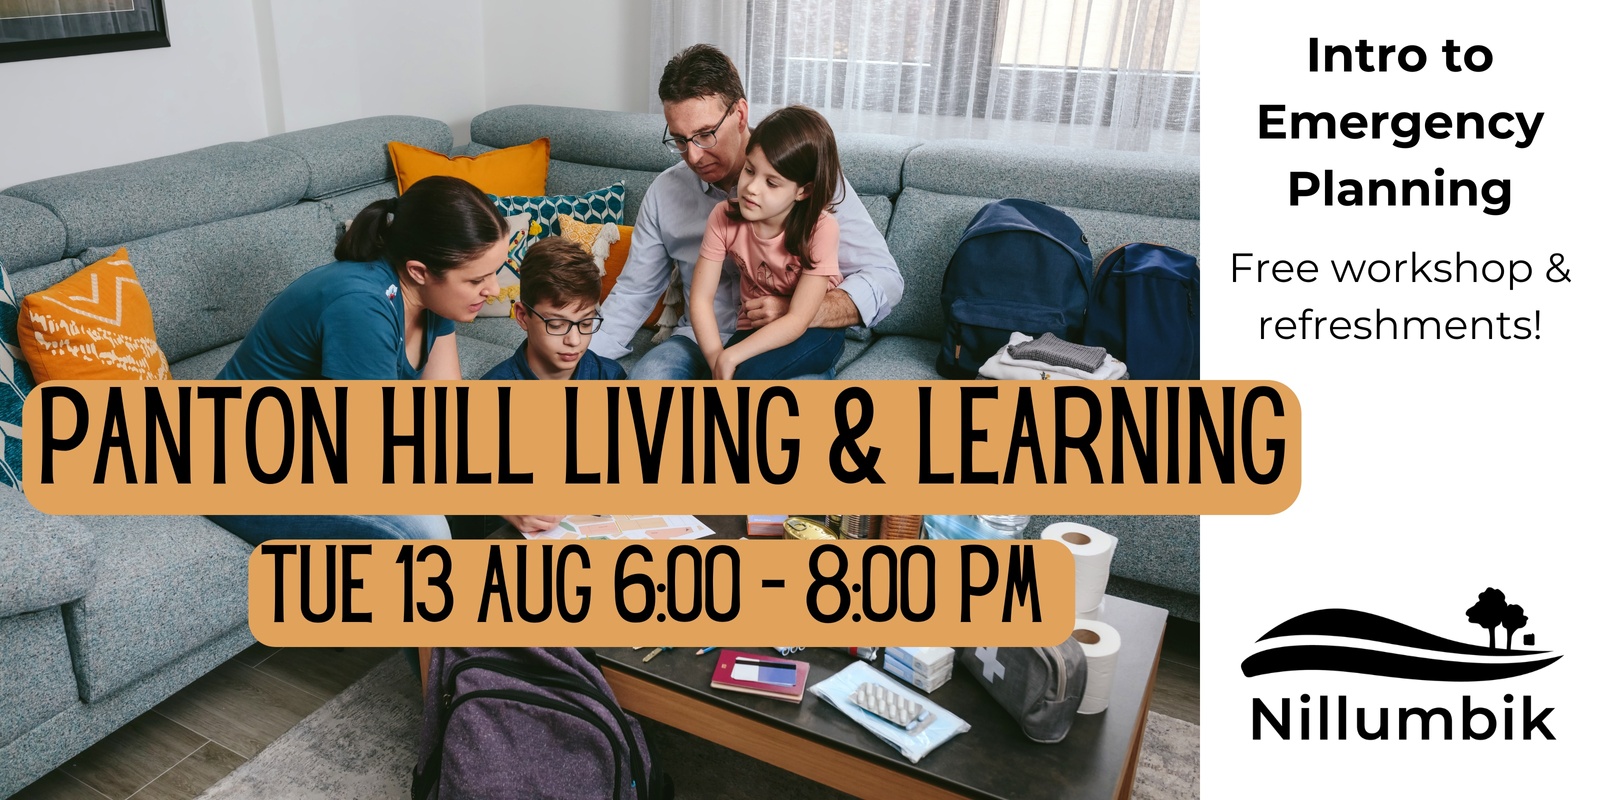 Banner image for Intro to Emergency Planning Workshop - Panton Hill Living & Learning